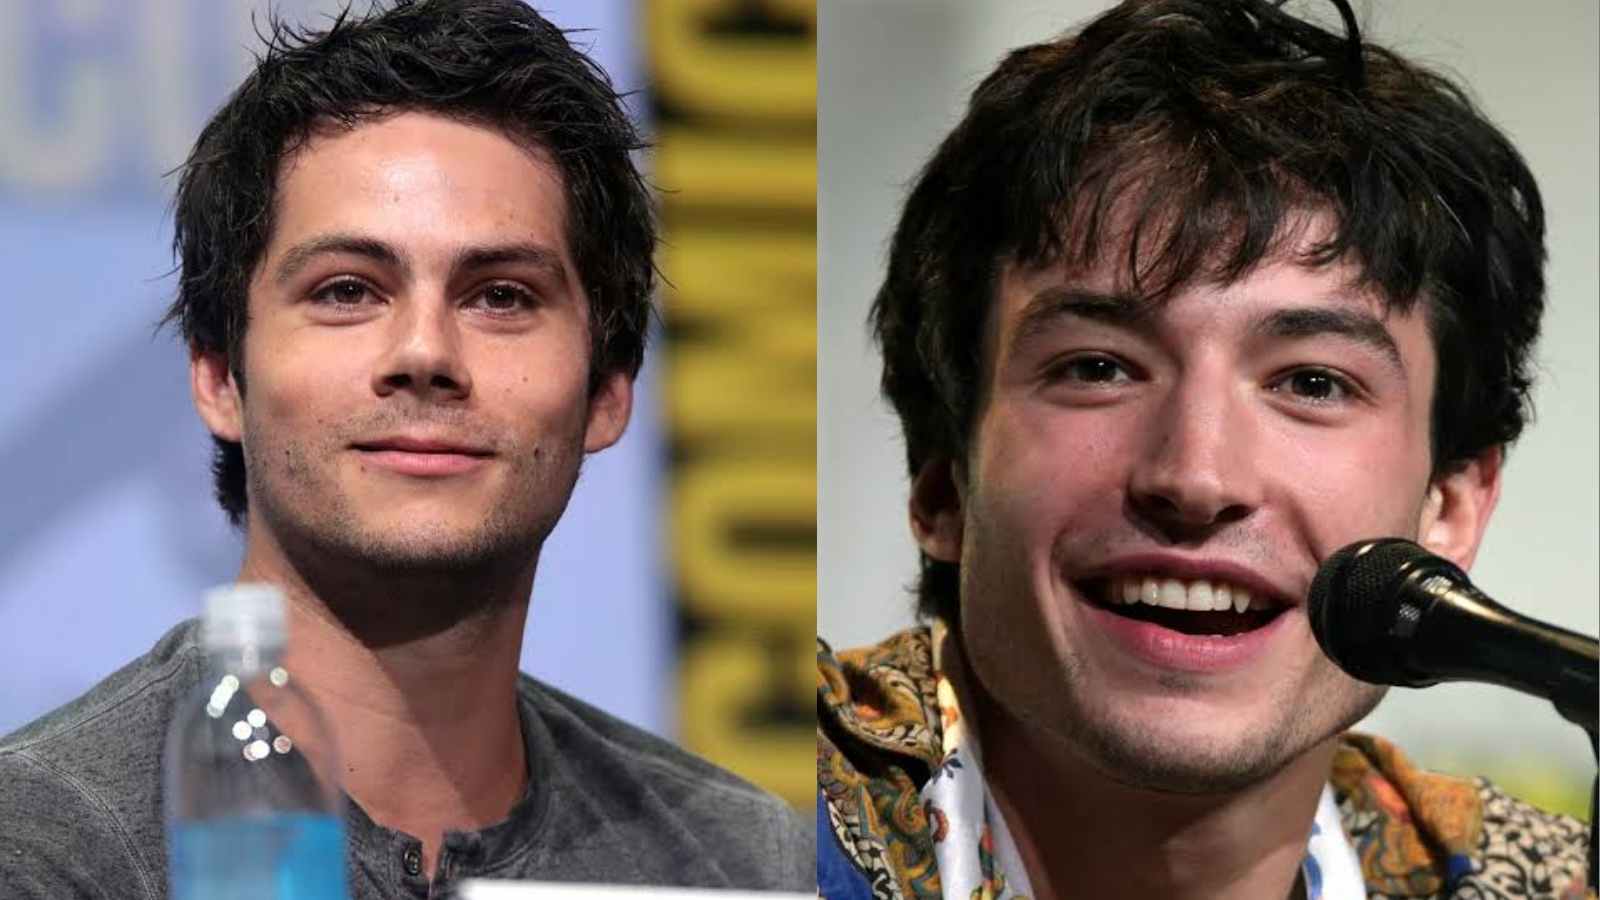 Ezra and Dylan